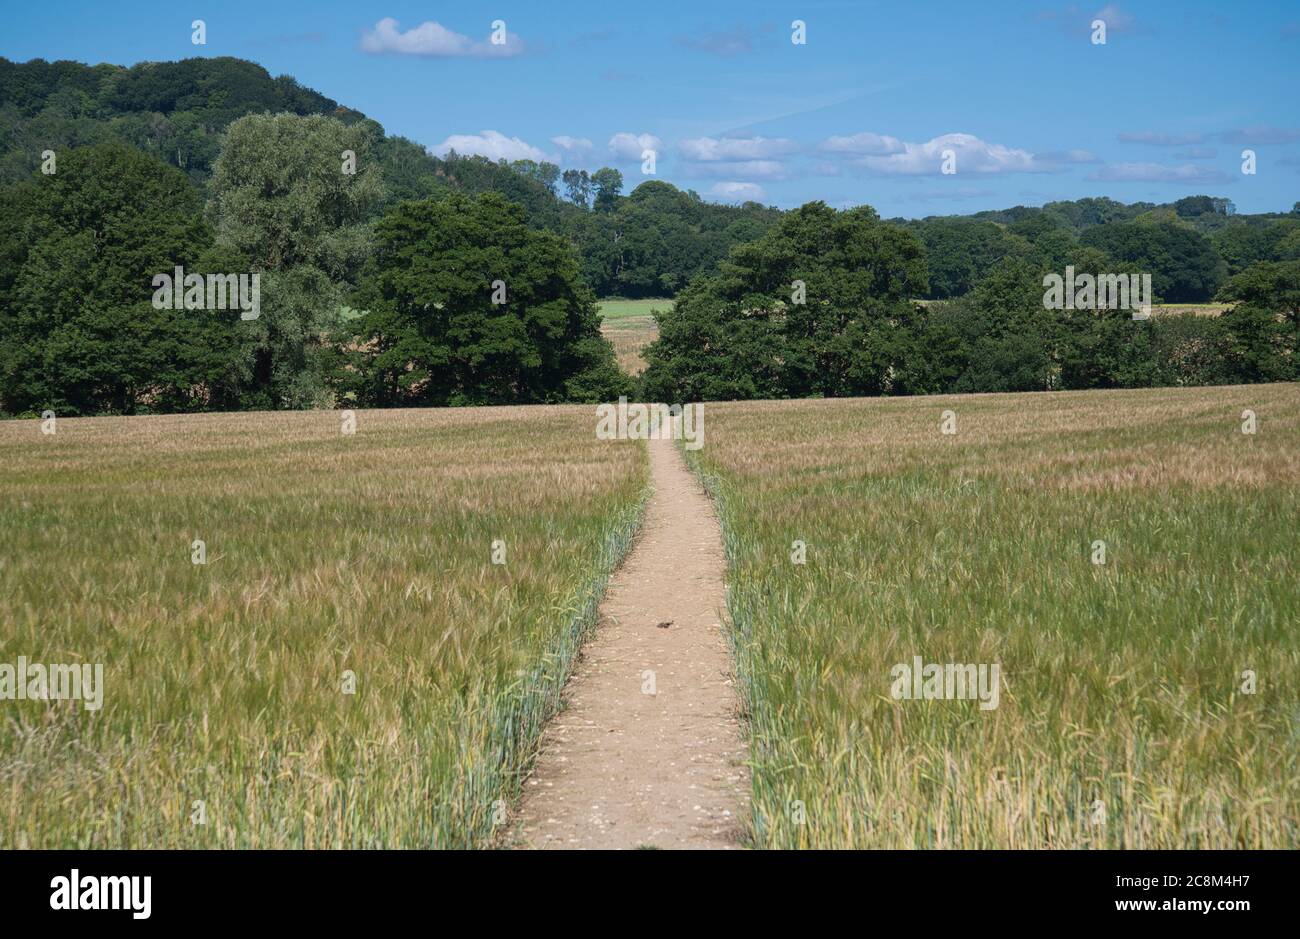 A public footpath through a field of wheat in Hampshire Hanger country, Greatham, Hampshire, UK Stock Photo